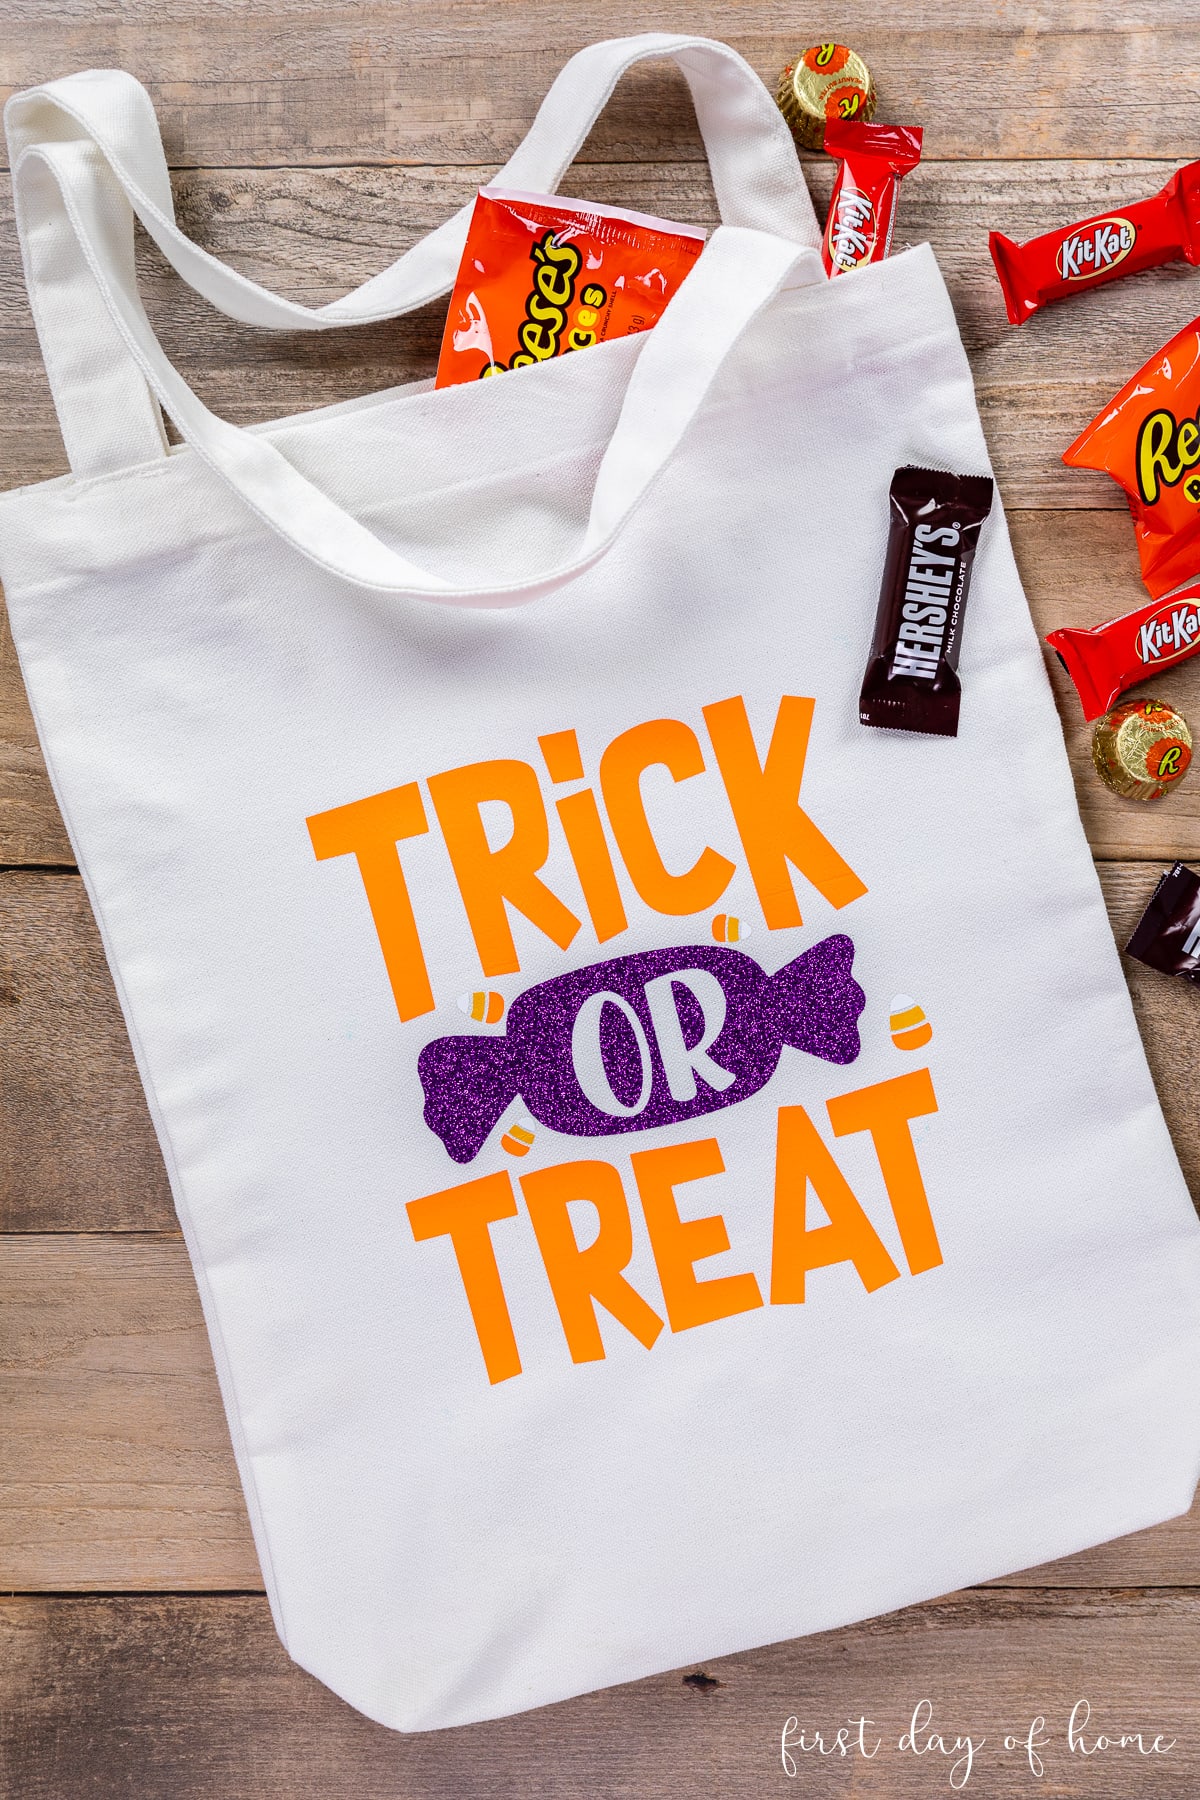 Halloween DIY trick or treat bag made with Cricut vinyl, shown with Halloween candy.